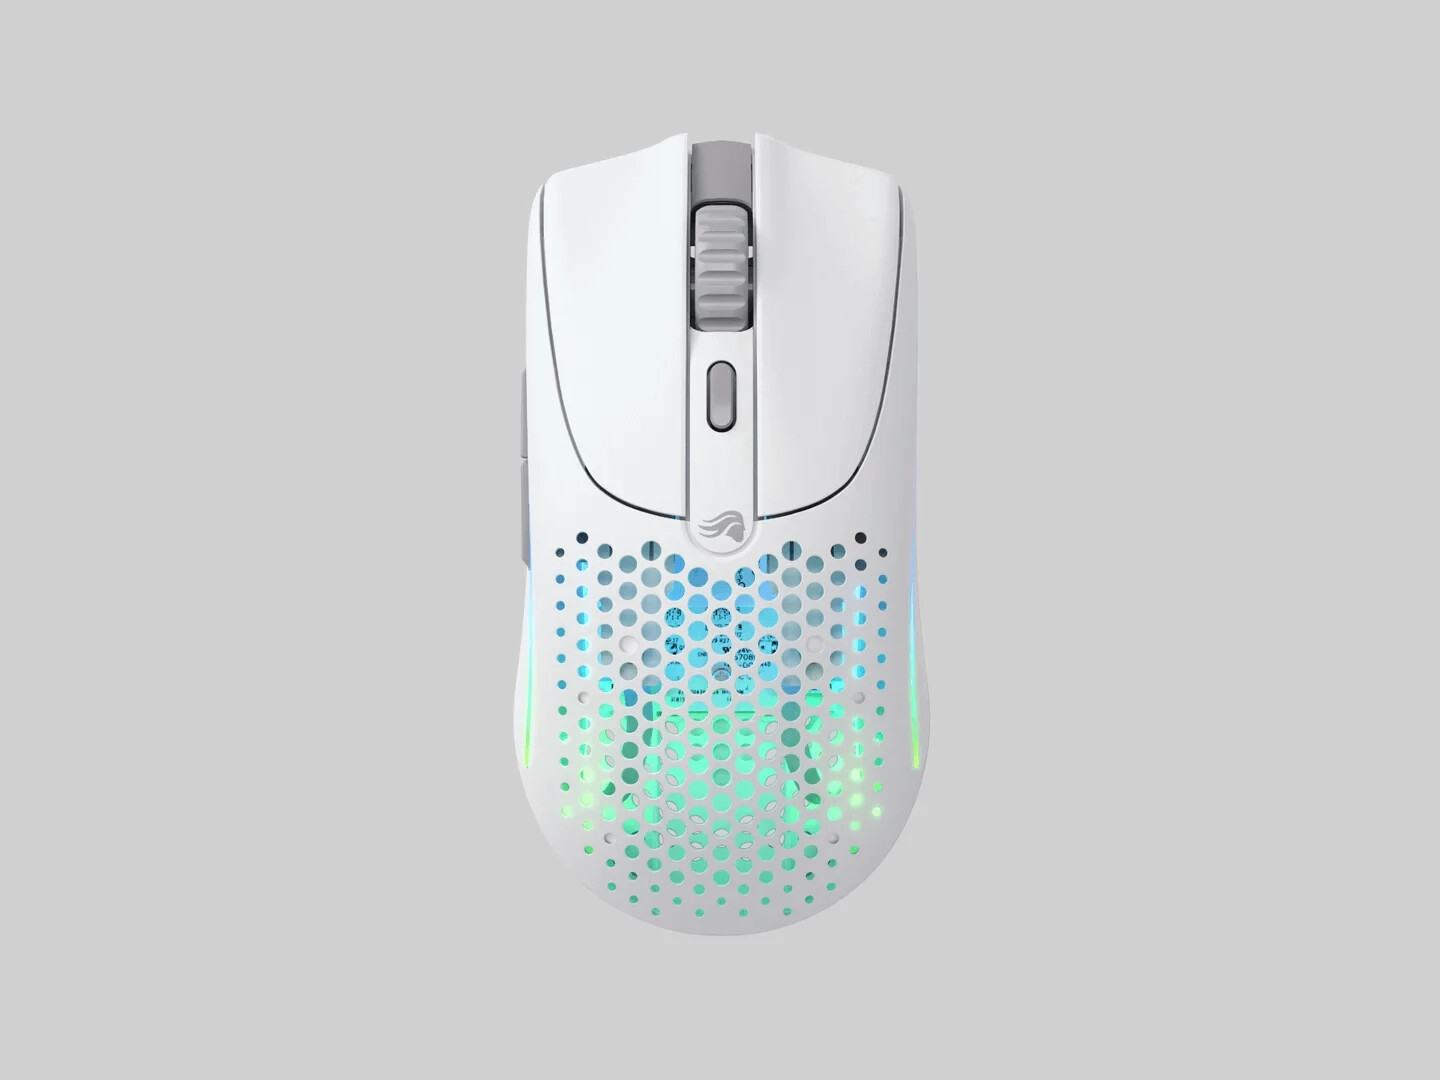 Glorious Model O 2 Gaming Mouse Release Date Confirmed